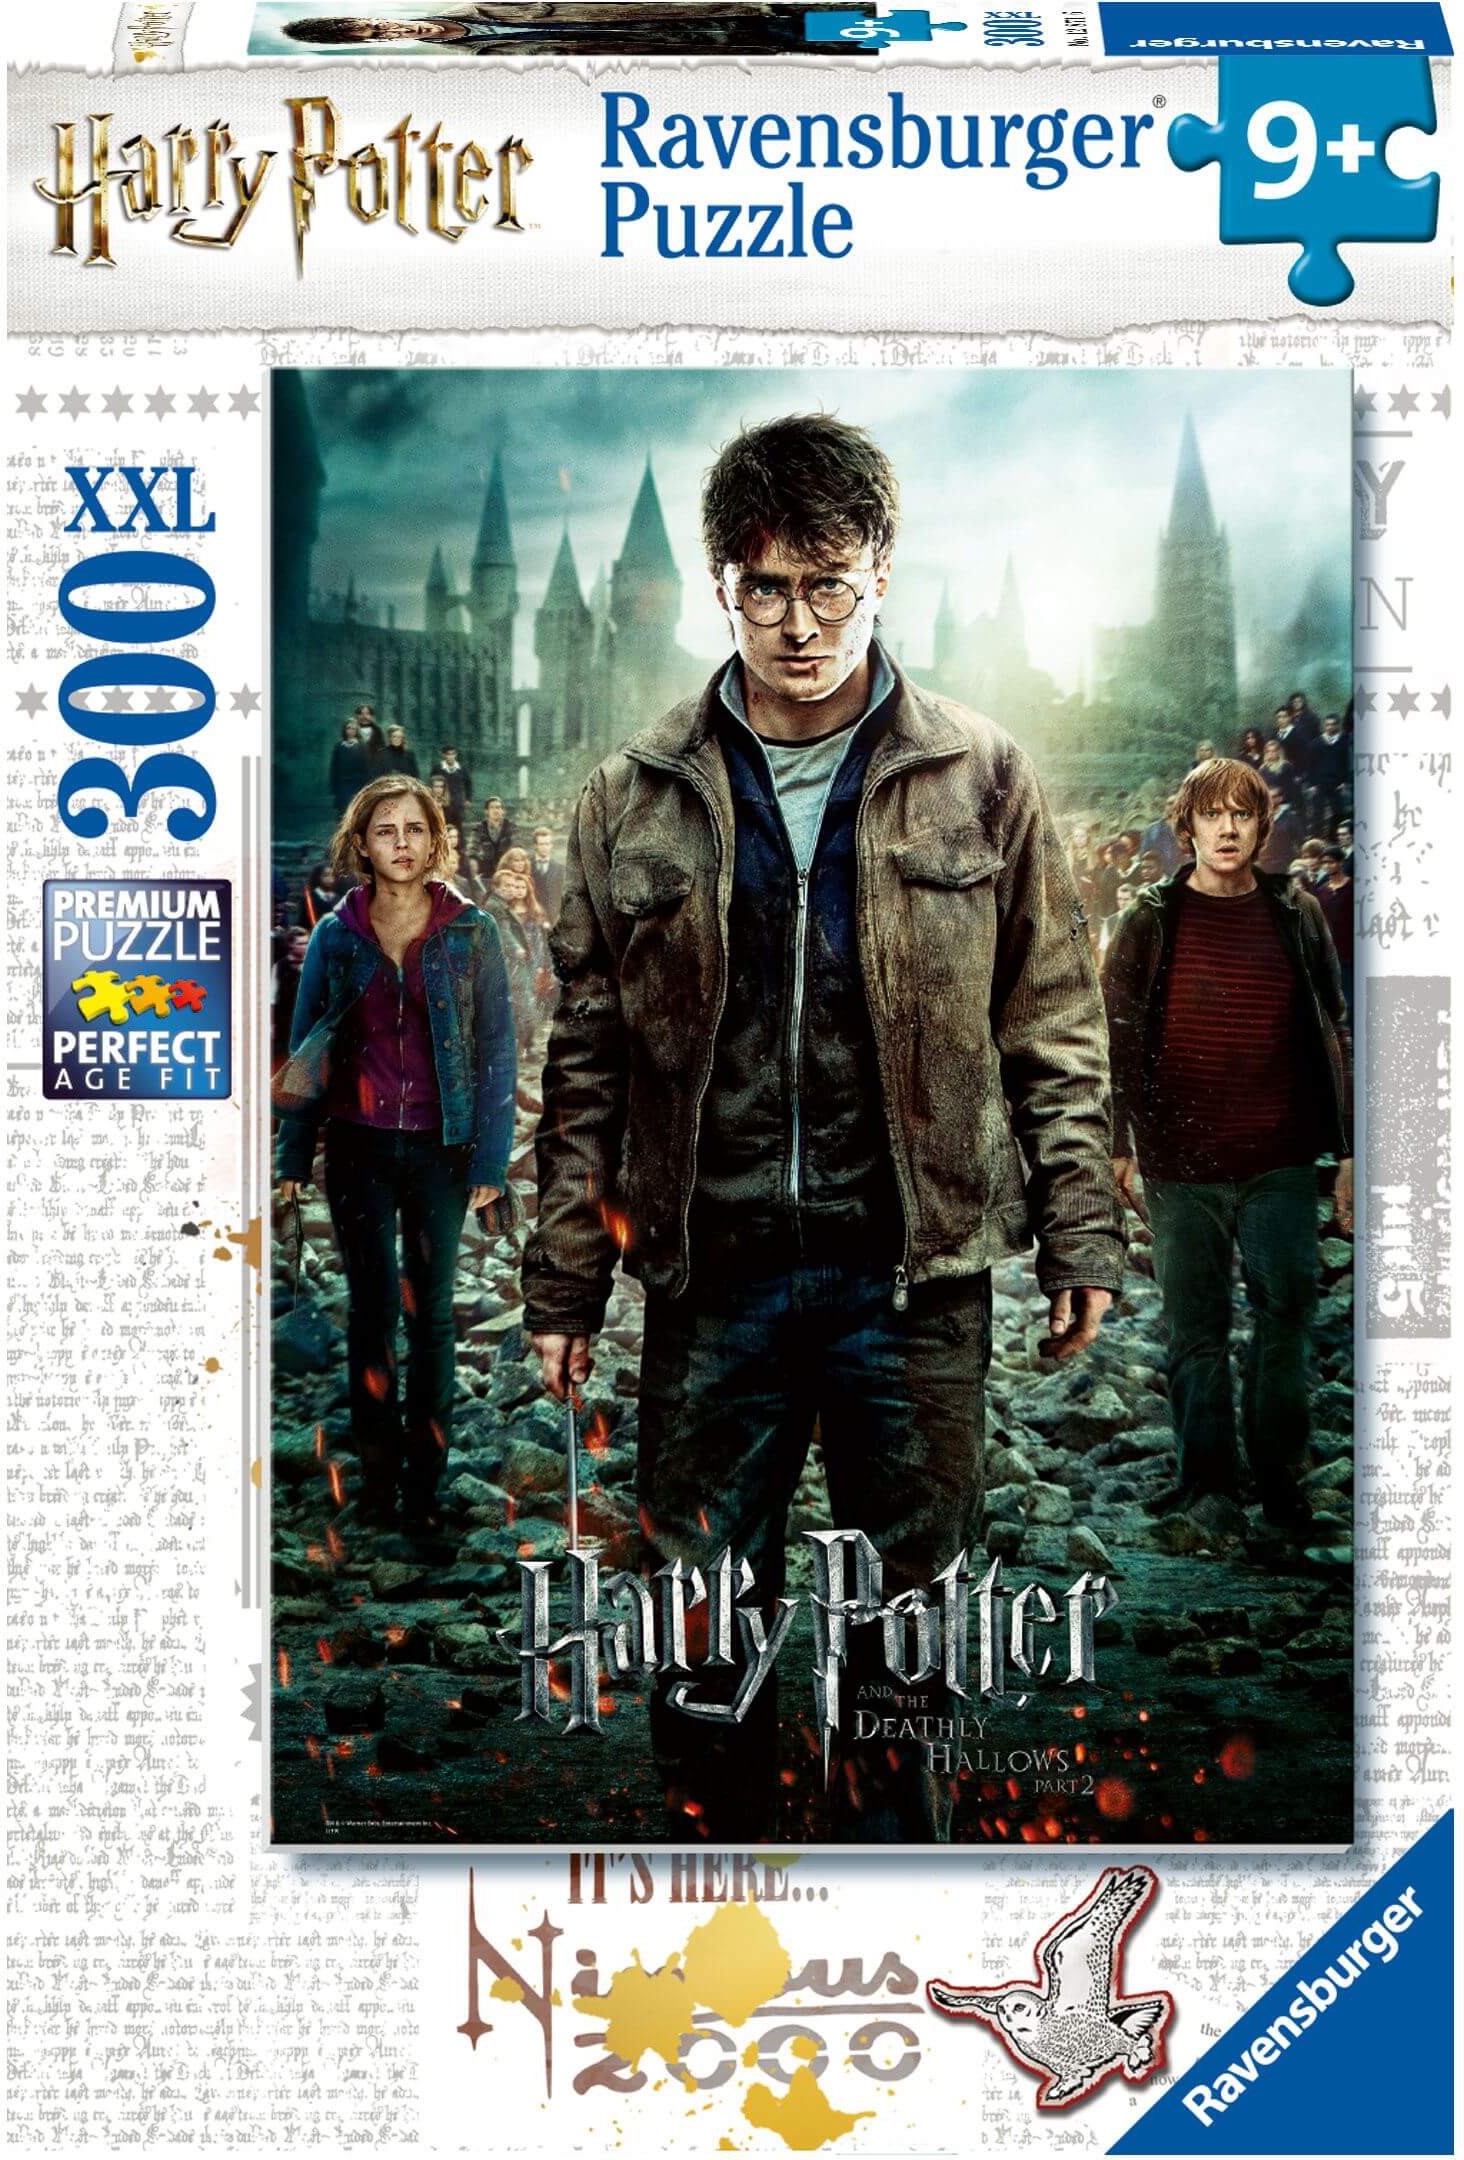 Harry Potter - Deathly Hallows Part 2 Jigsaw Puzzle